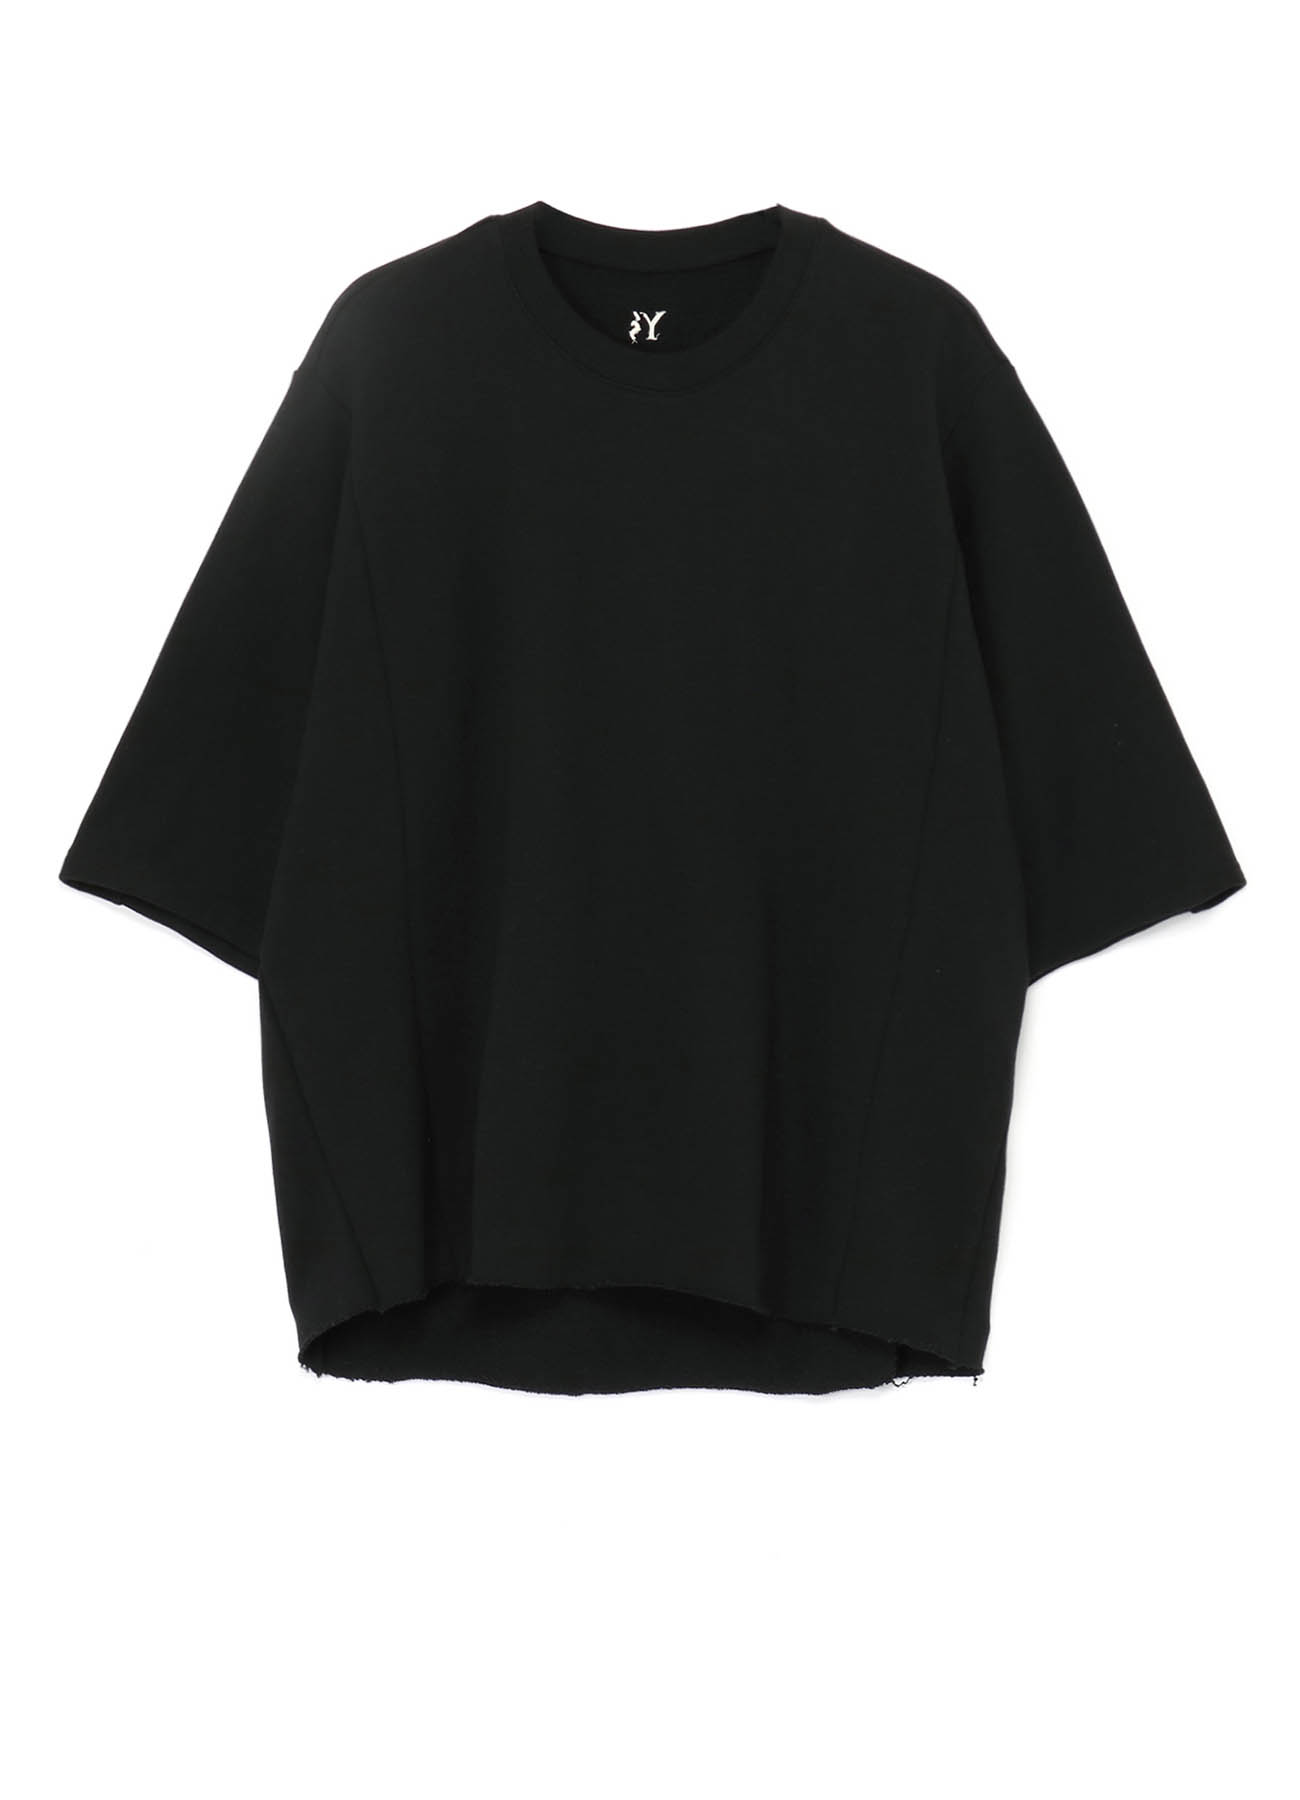 FRENCH TERRY Y'S LOGO EMBROIDERY OVERSIZED SWEATSHIRT